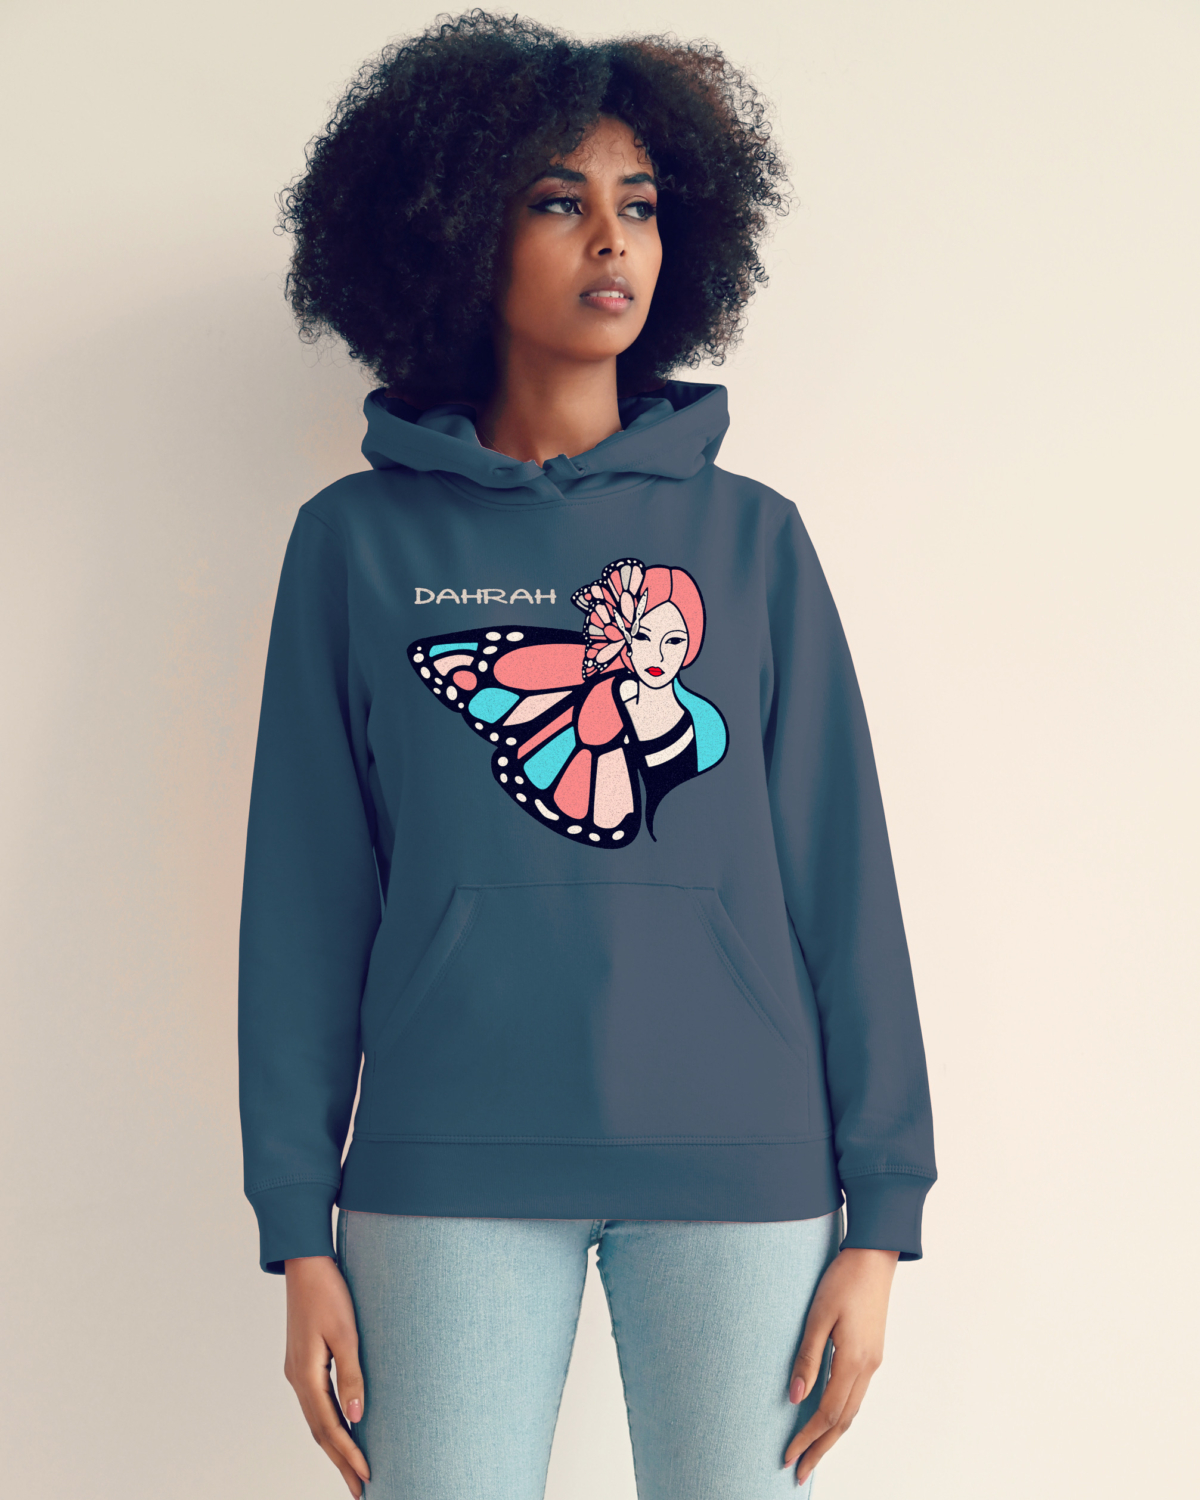 Organic hoodie with print of a geisha and butterfly by Dahrah Darah Fashion.